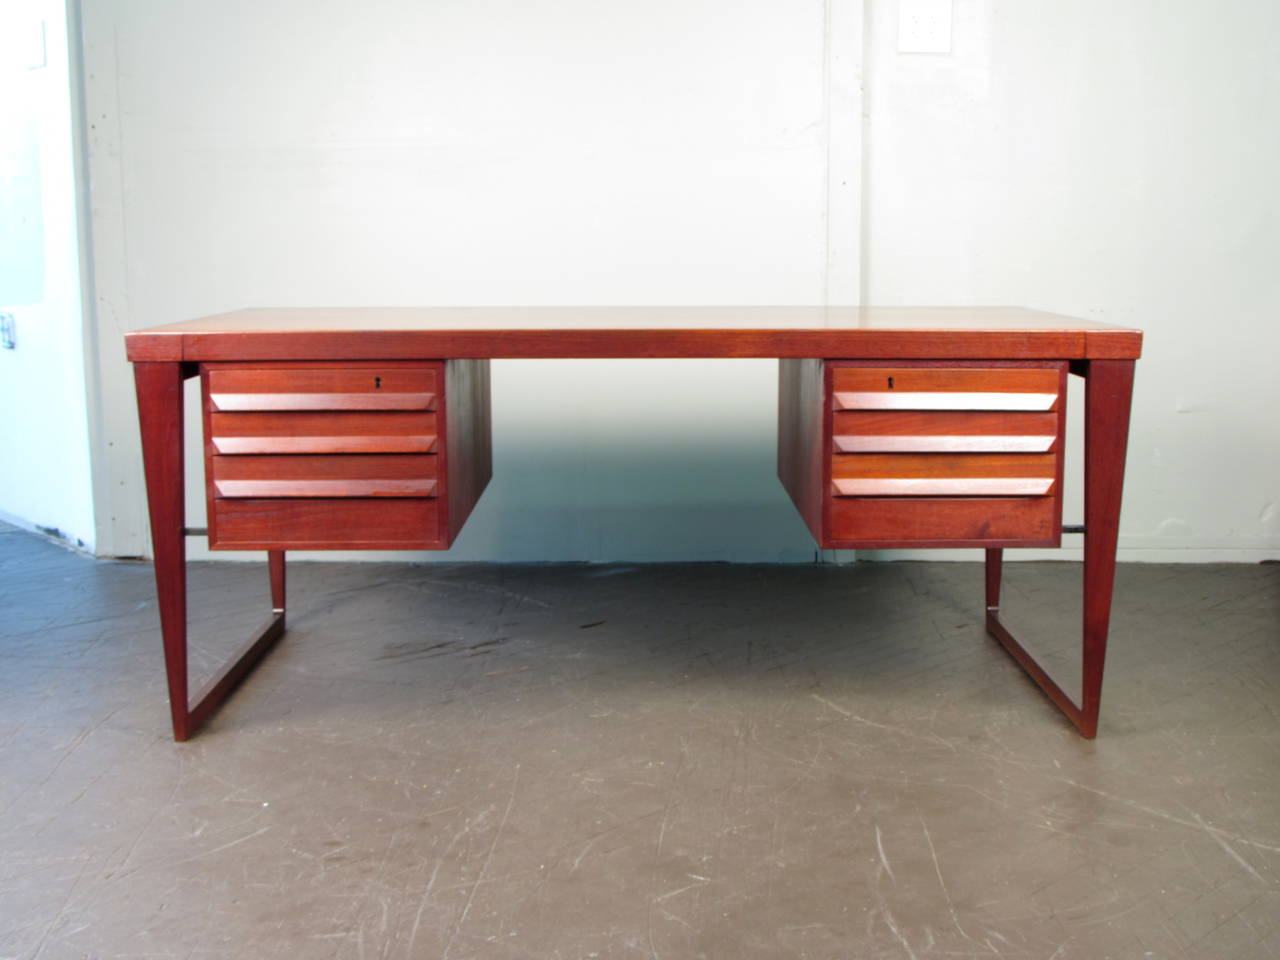 Large handsome Danish modern executive desk on sled base by Kai Kristiansen, circa 1960. The teak construction is substantial and sturdy. This piece in excellent condition with normal wear for age and use. Comes with one key that locks the front